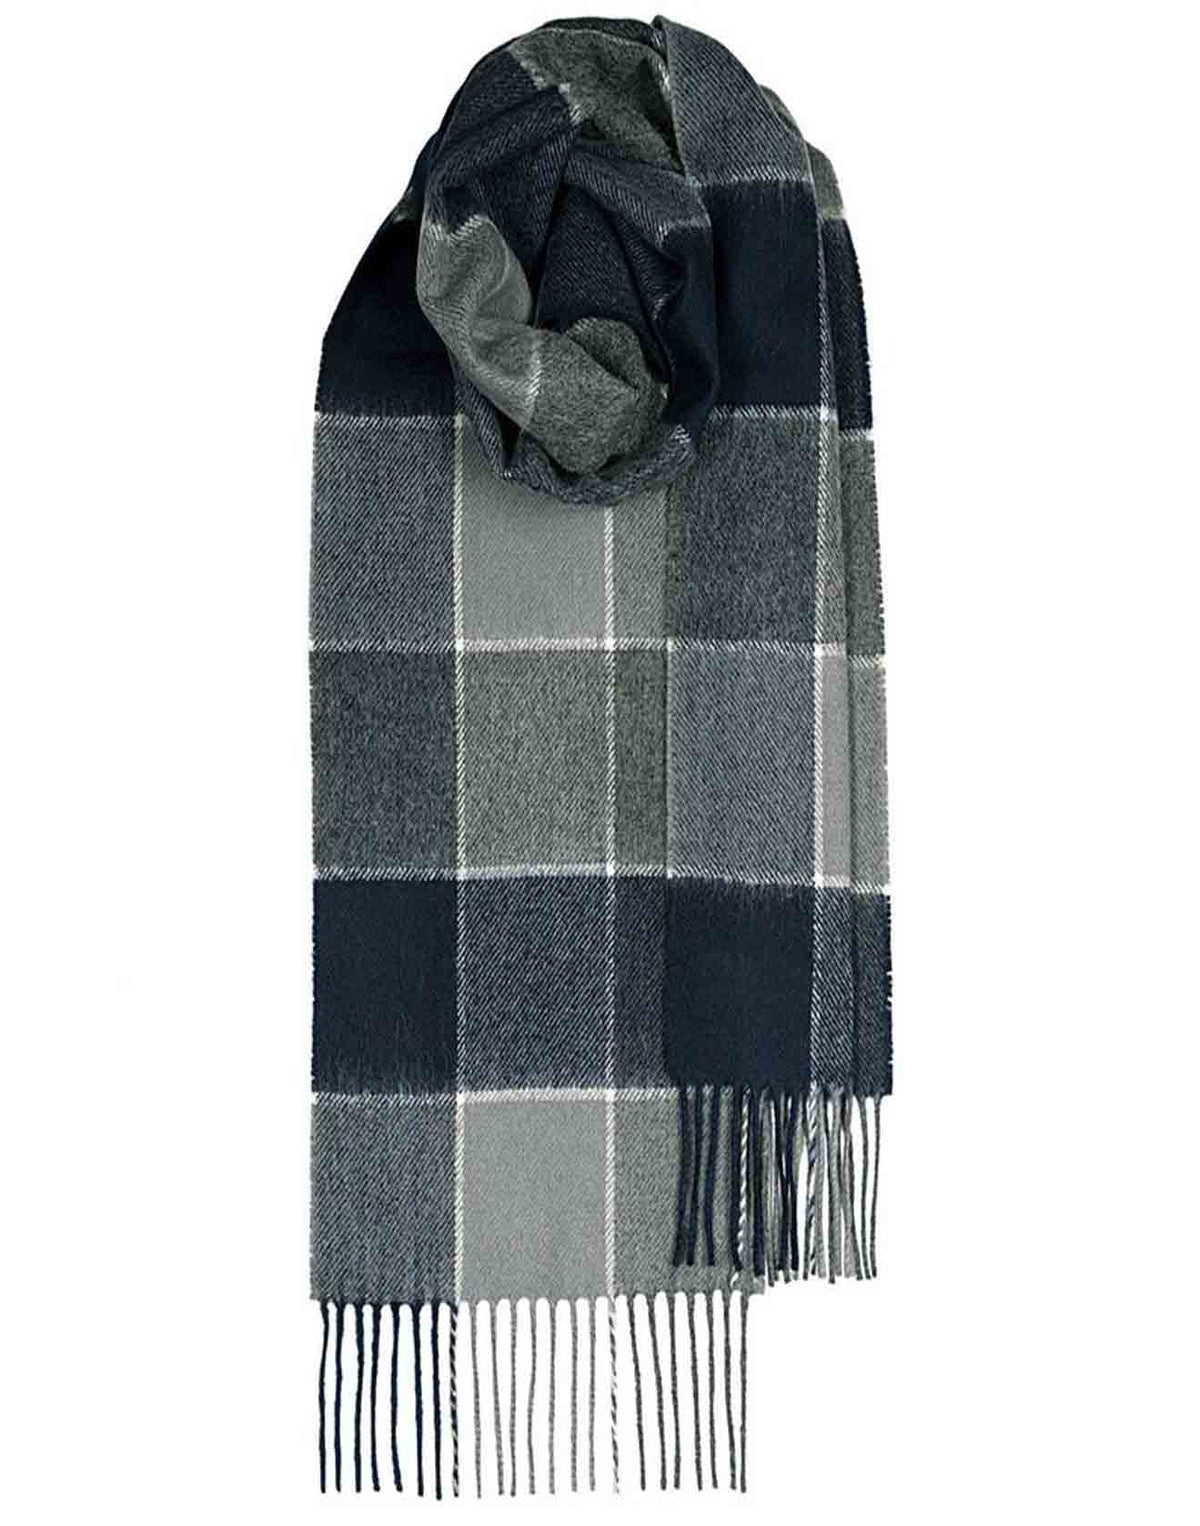 NAVY GREY 100% LAMBSWOOL SCARF - MADE IN SCOTLAND